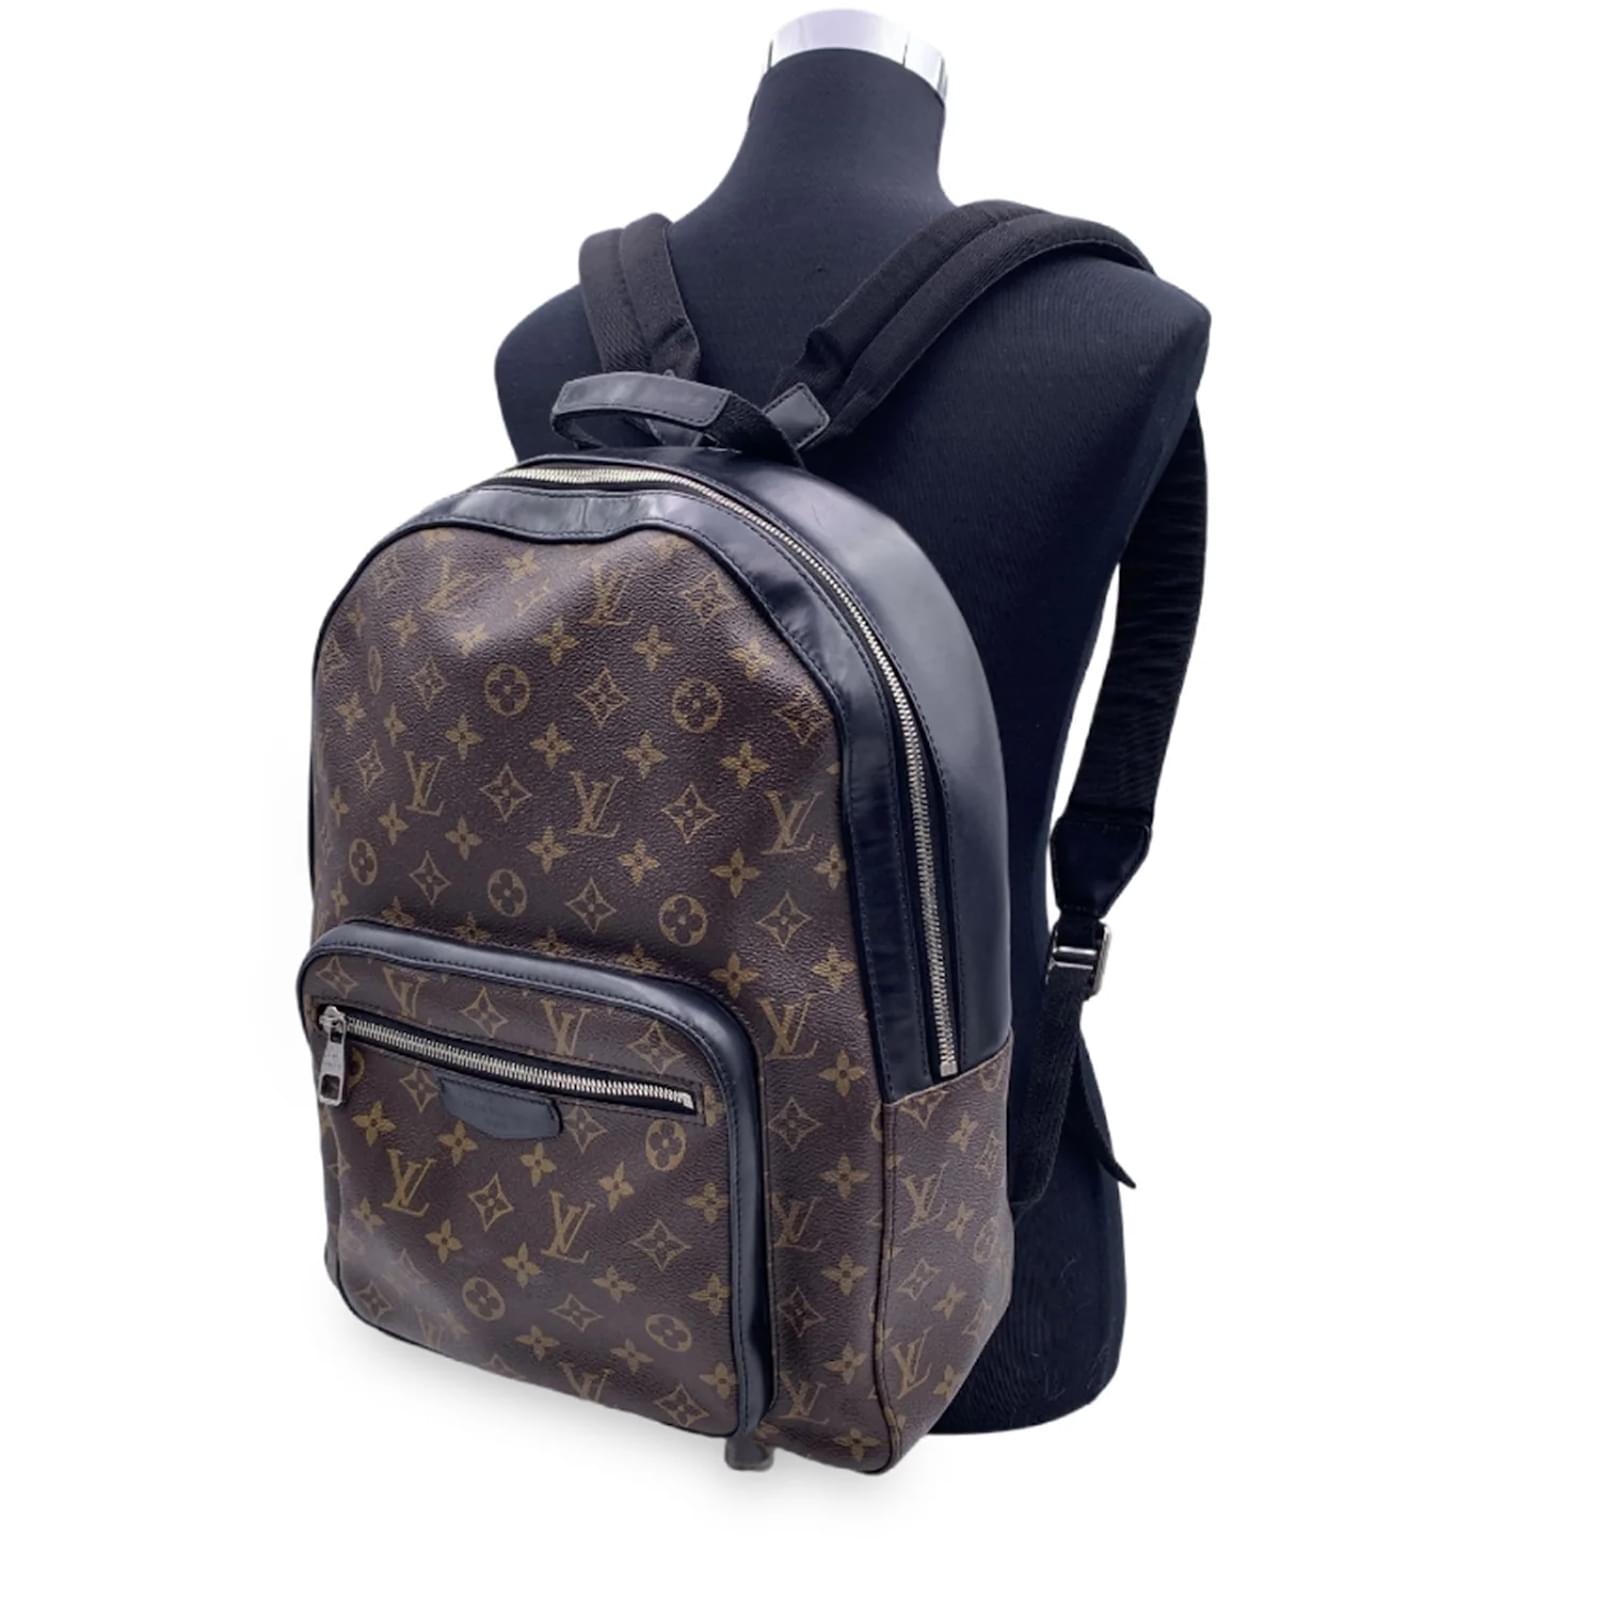 Louis-Vuitton backpack- Josh Canvas Backpack, Leather, Gently Used